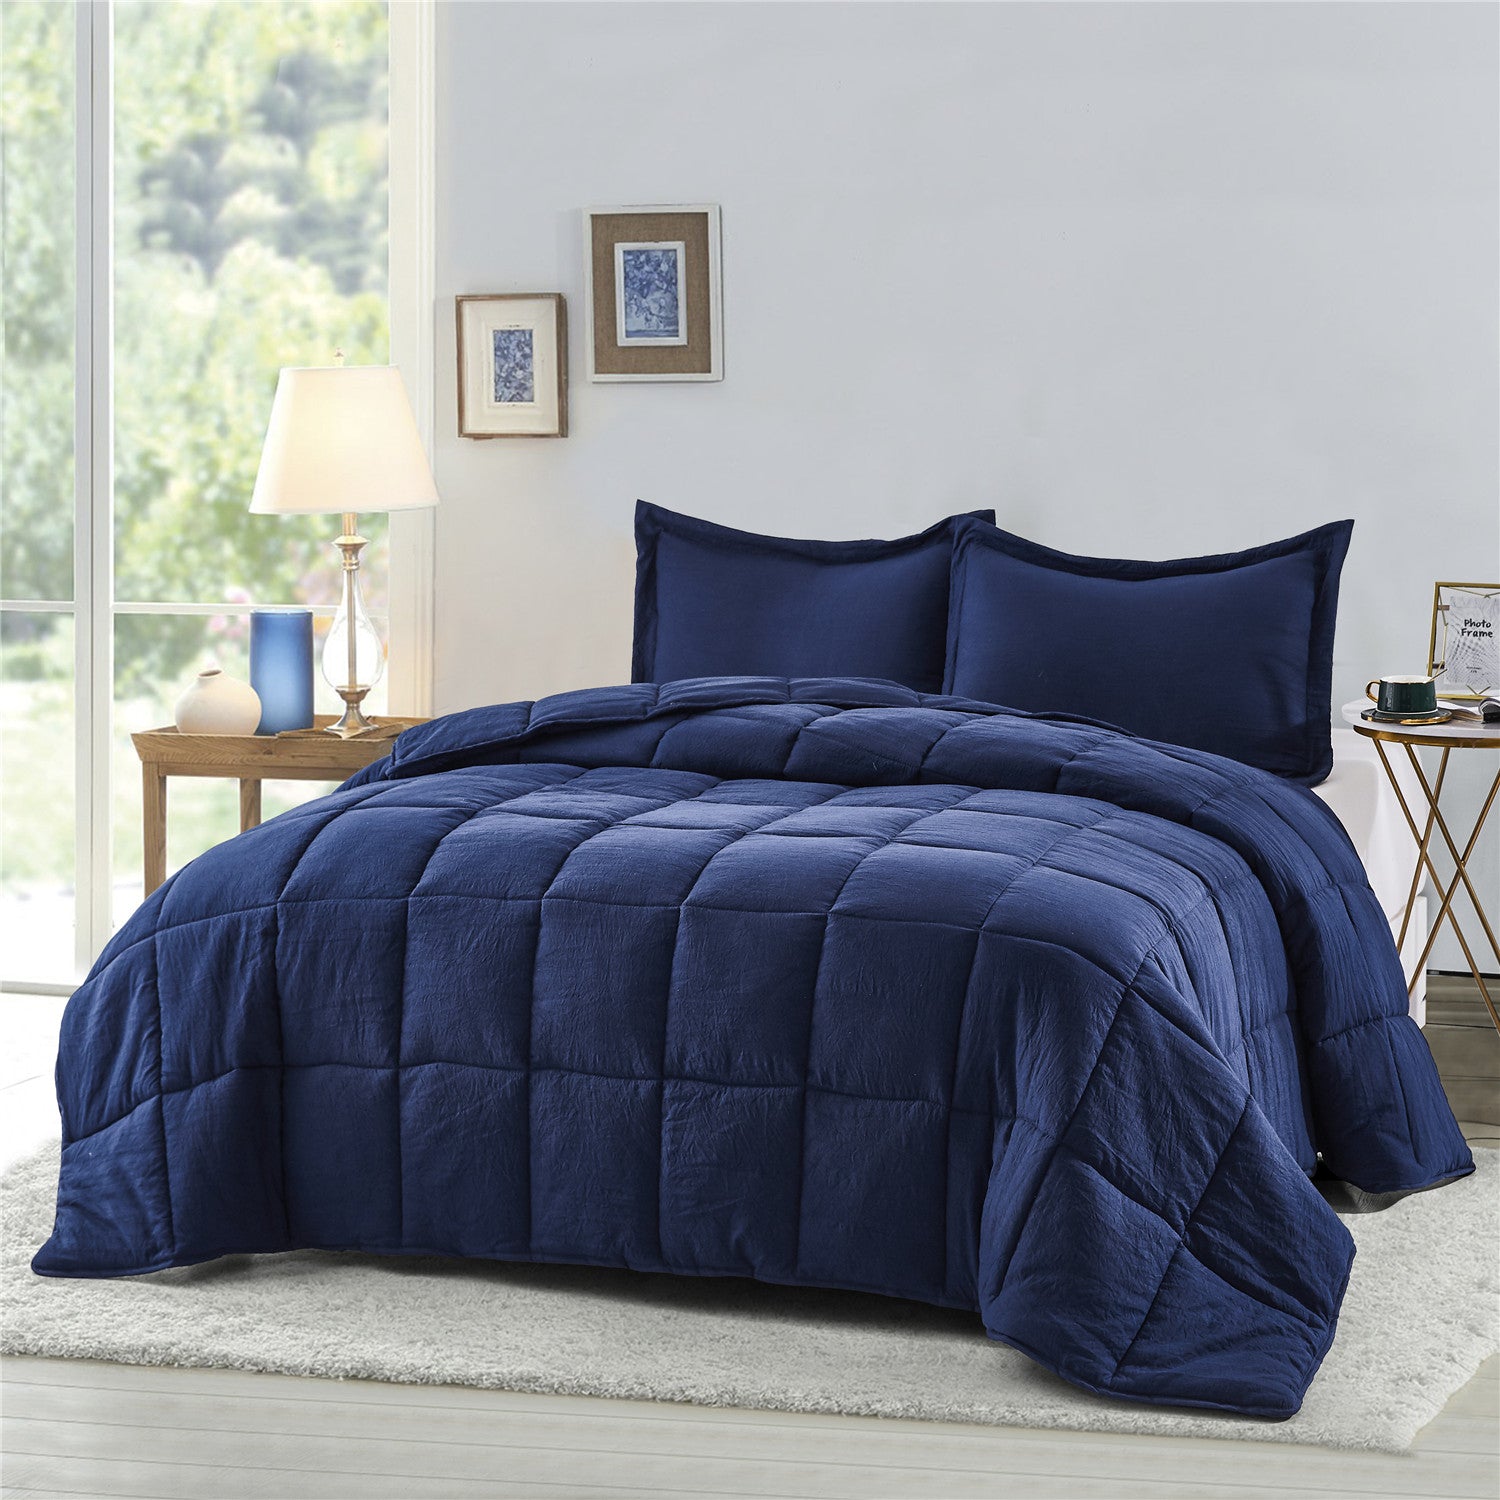 ALTERNATIVE DOWN 3PC COMFORTER. PERFECT FOR ANY SEASON. ULTRA SOFT MICROFIBER COVER. NAVY BLUE